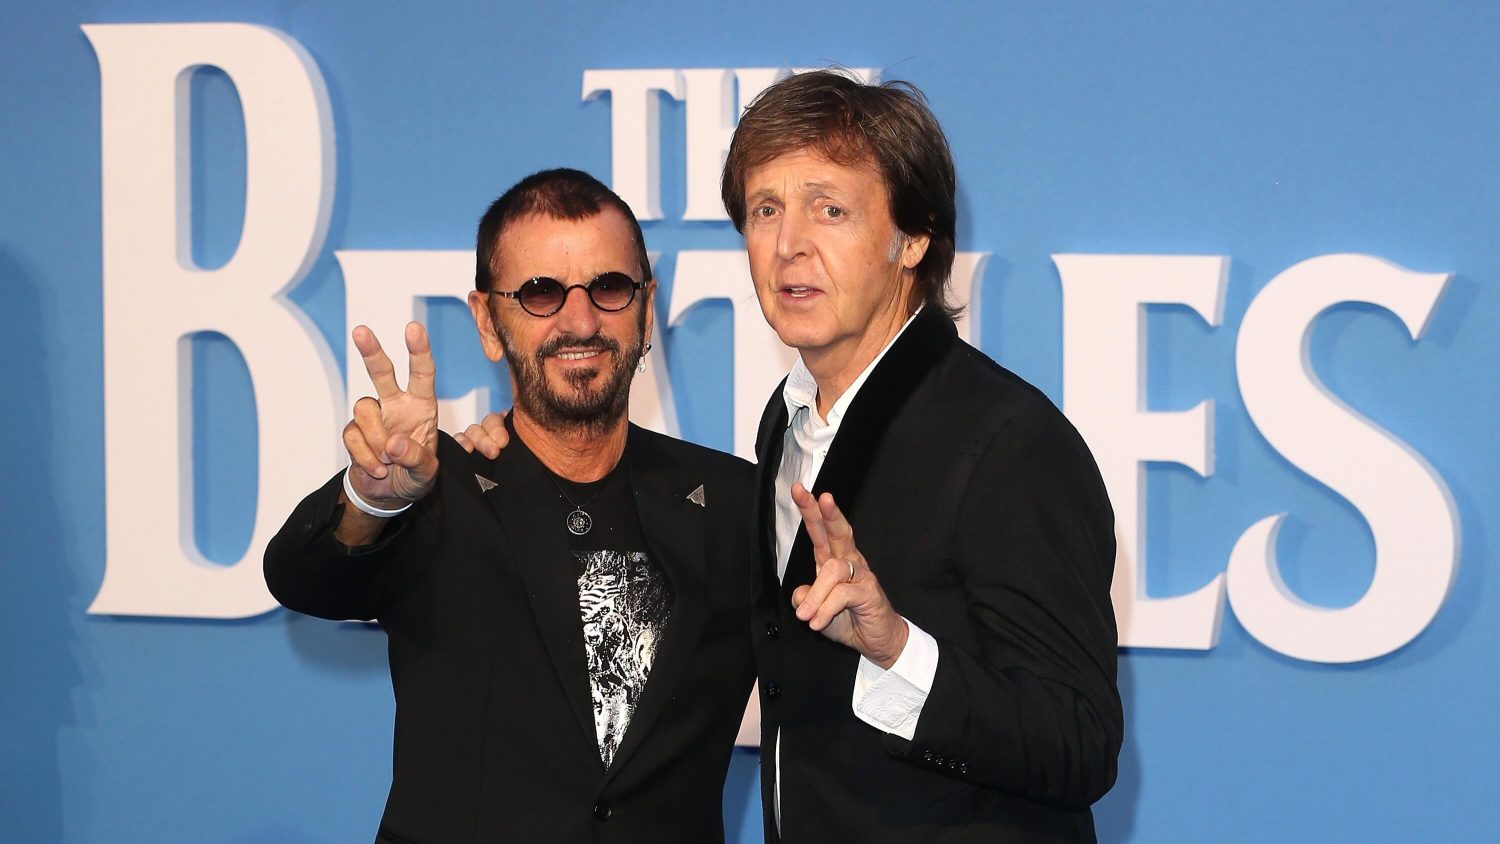 80 Year Old Ringo Starr Says Broccoli and Blueberries Keep Him Young